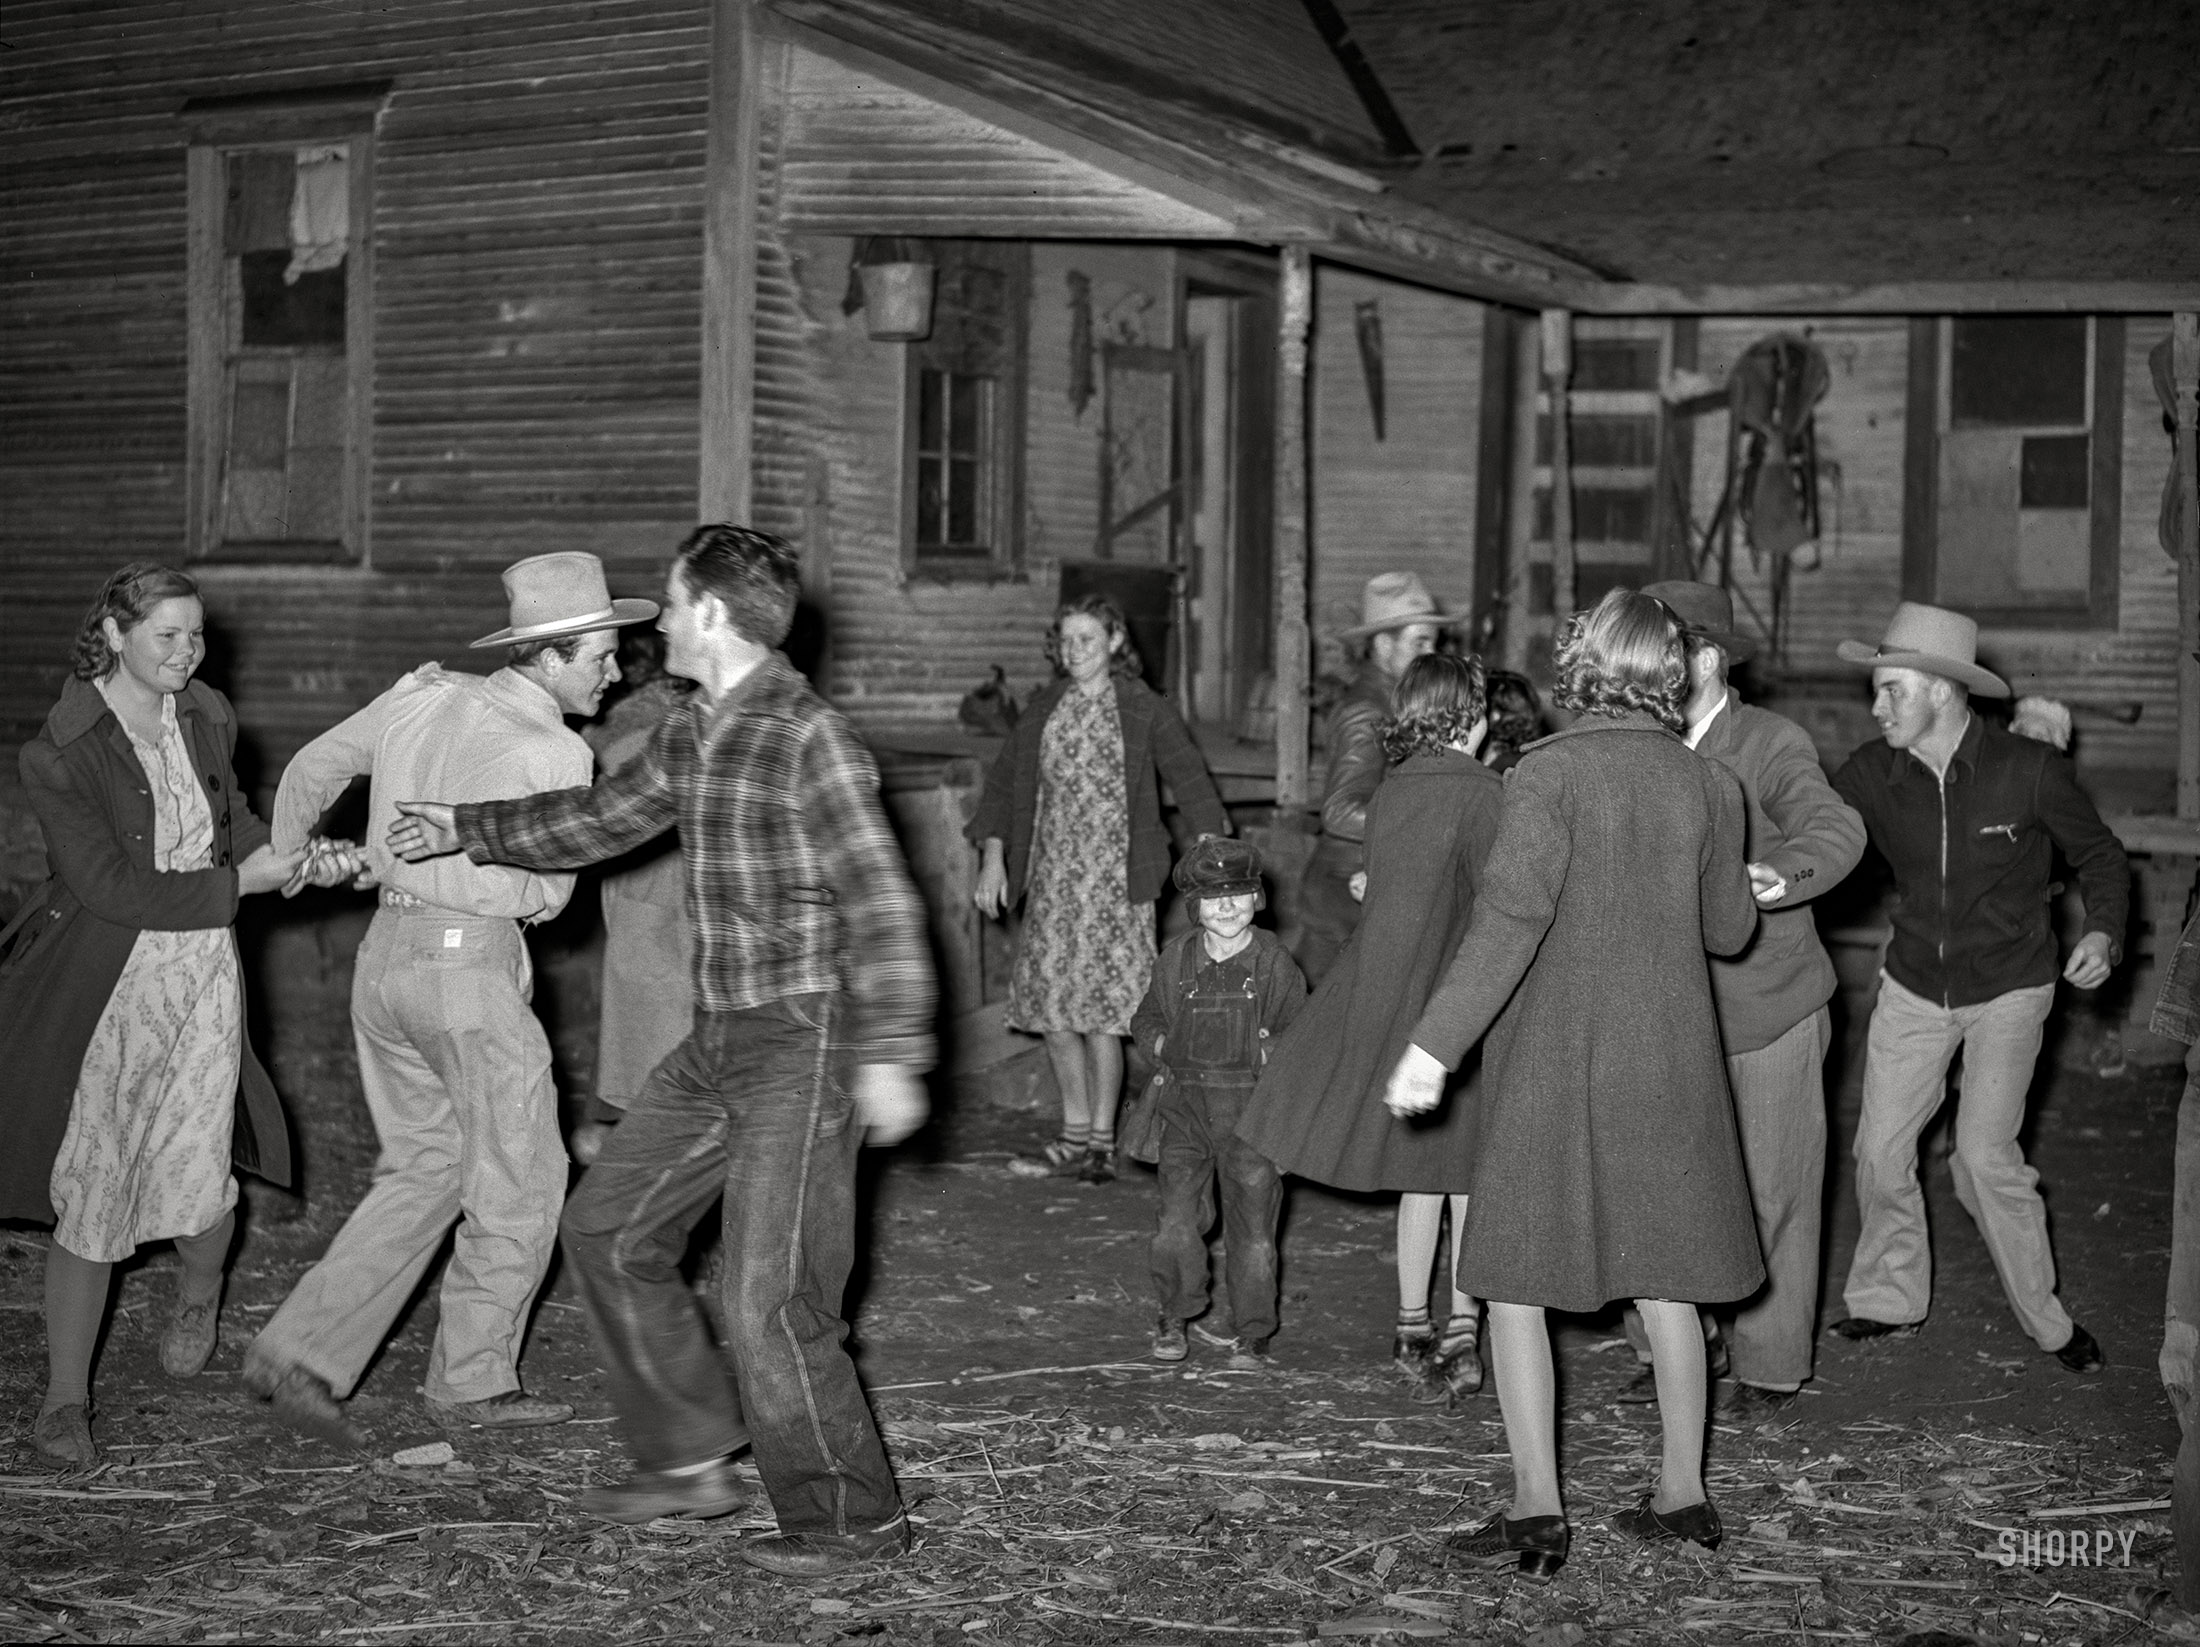 February 1940. "Swing game at 'play party' in McIntosh County, Oklahoma." Photo by Russell Lee for the Farm Security Administration. View full size.